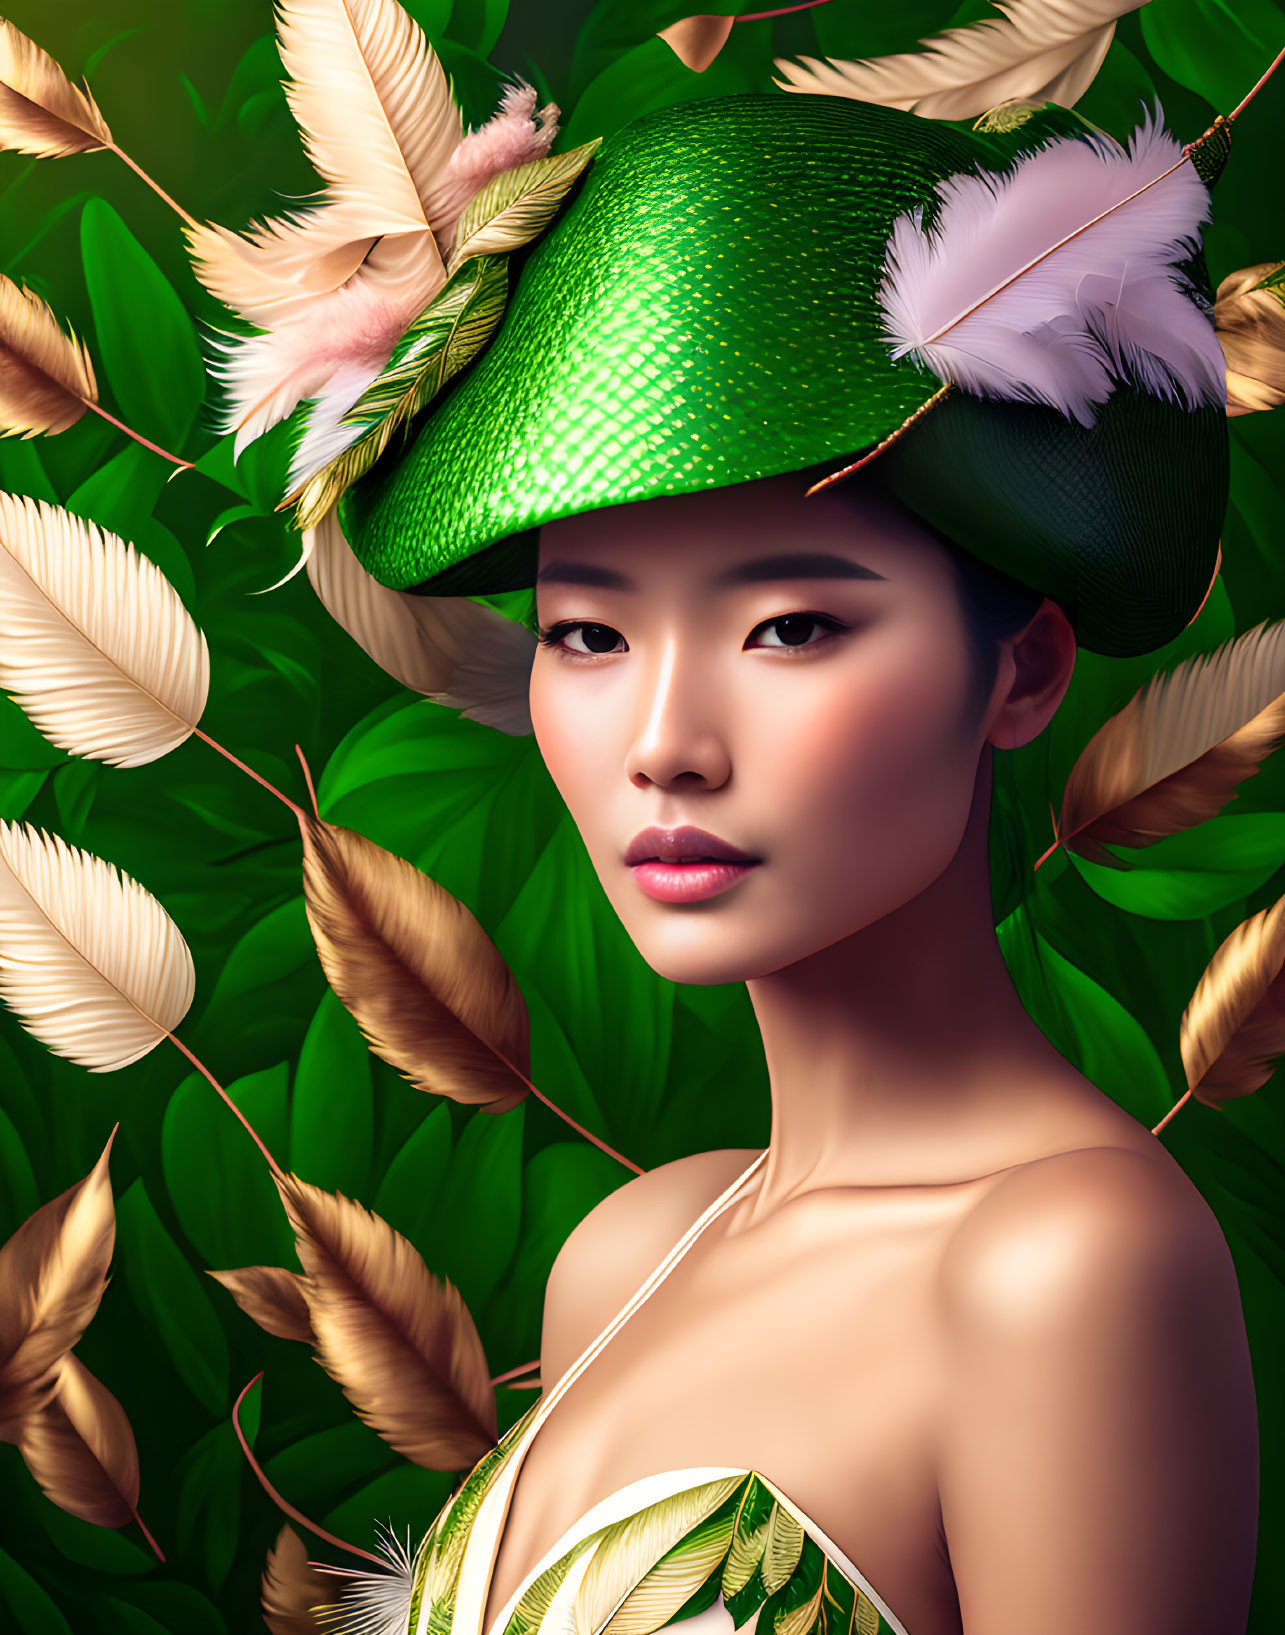 Asian woman portrait with green textured hat in lush foliage setting